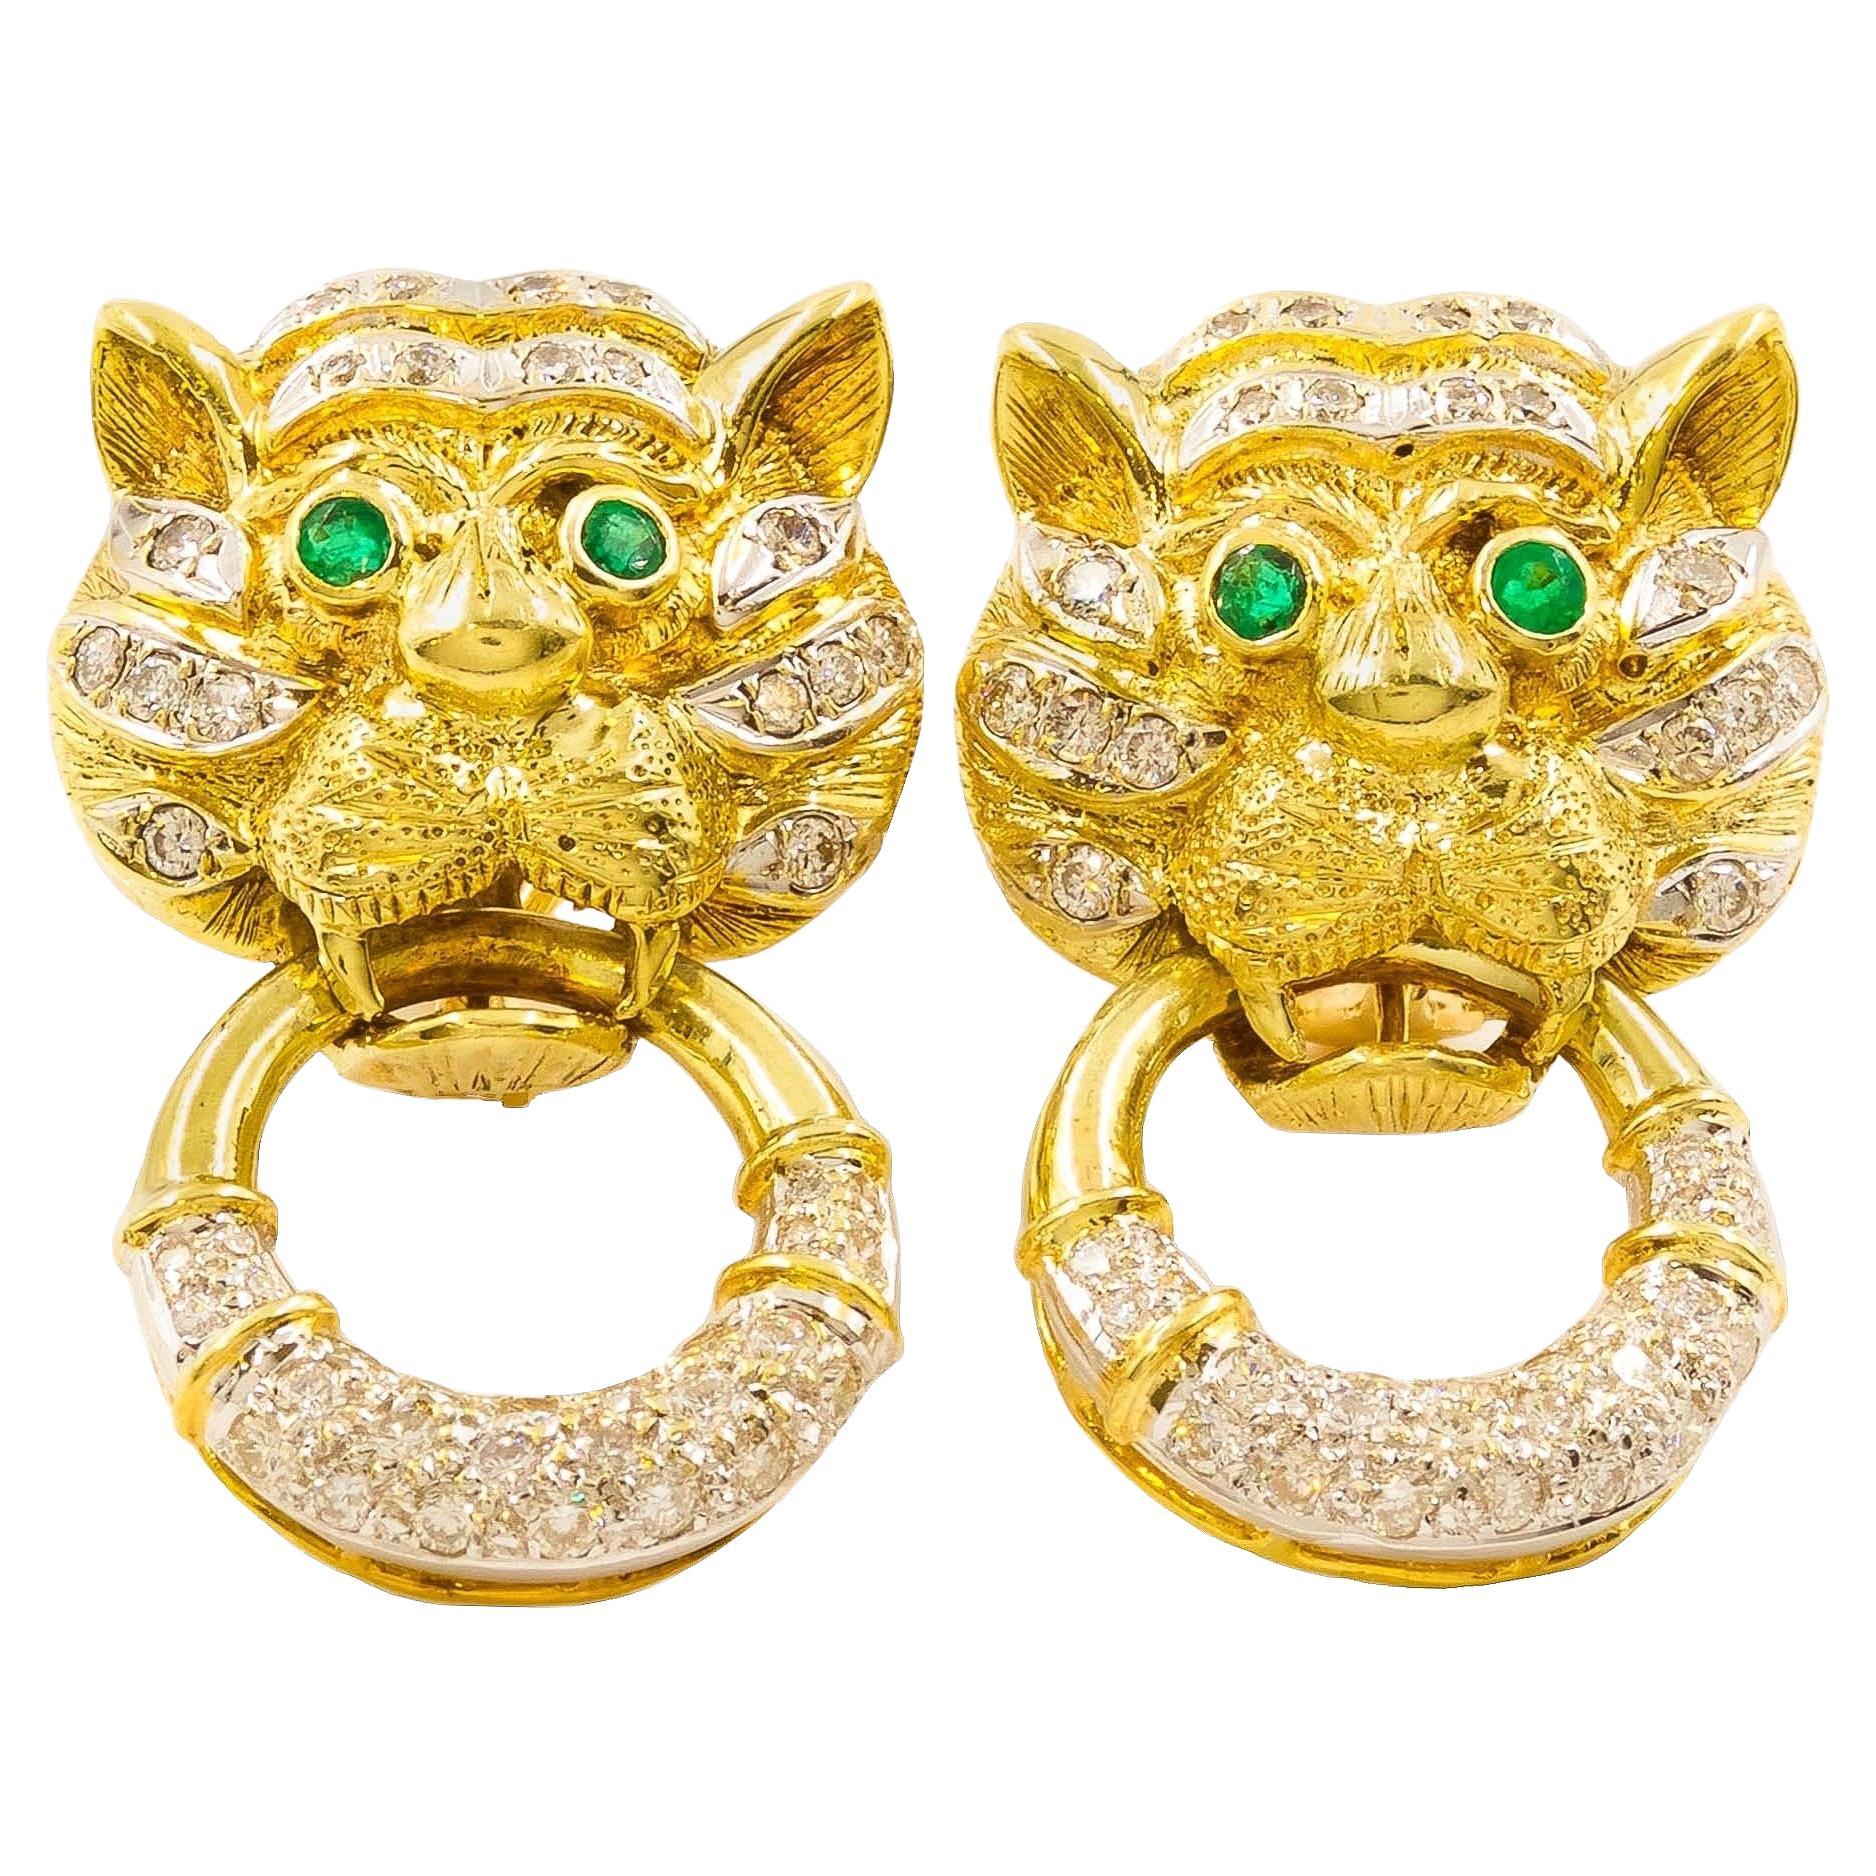 Vintage Pair of 14 Karat Gold Tiger-Face Earrings with 87 Diamonds